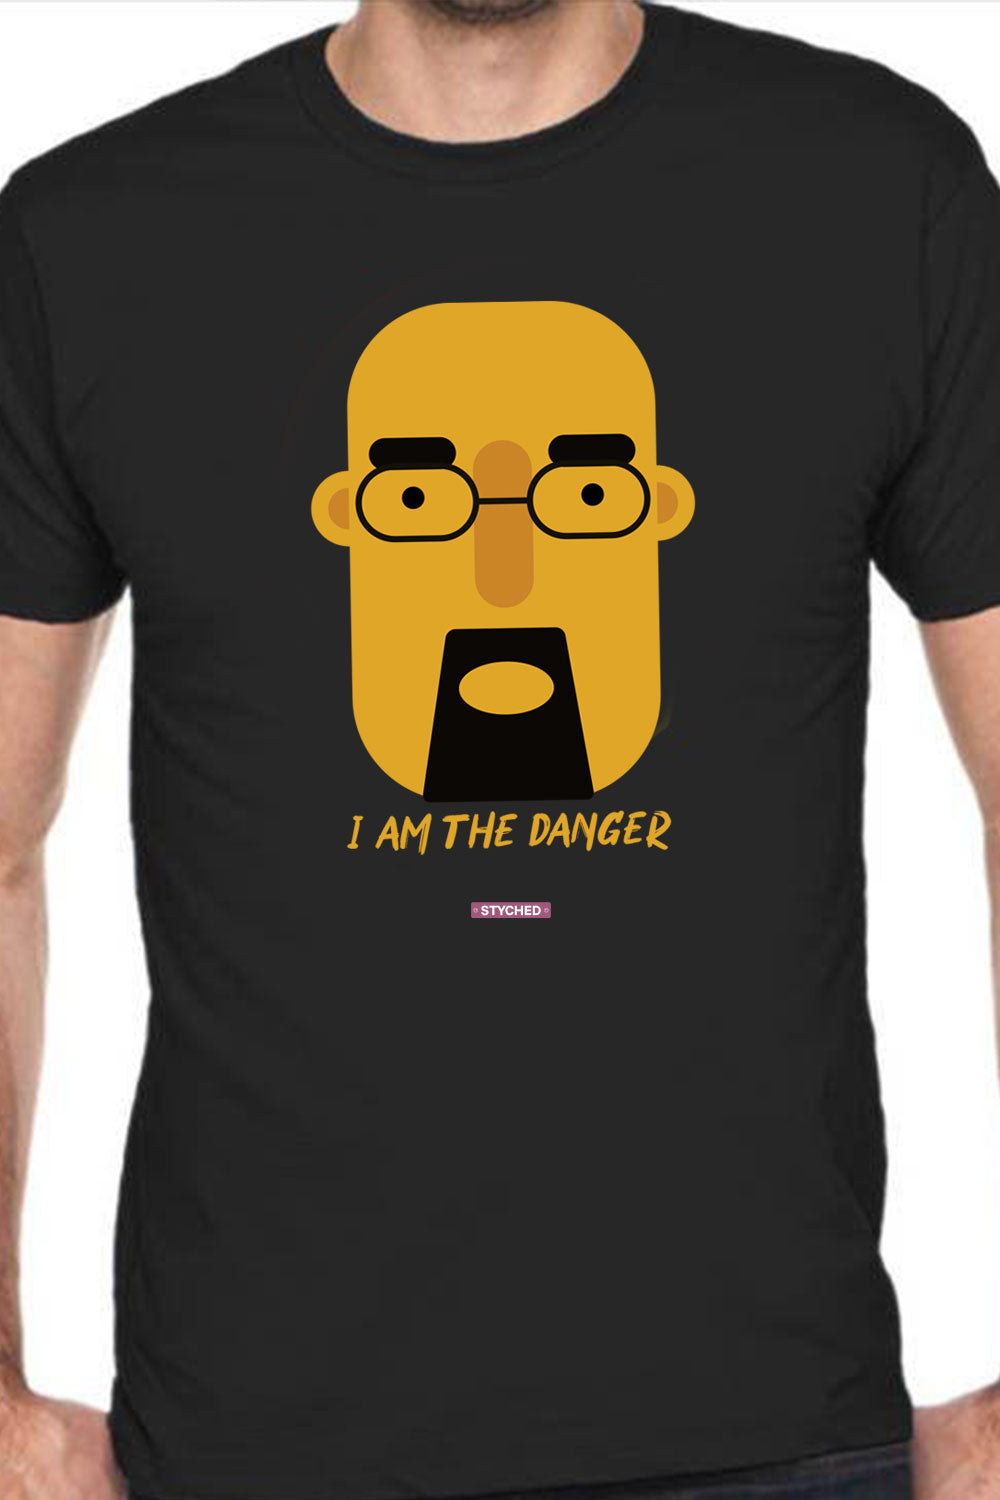 I am the Danger, Breaking Bad - Quirky Graphic T-Shirt Black Color